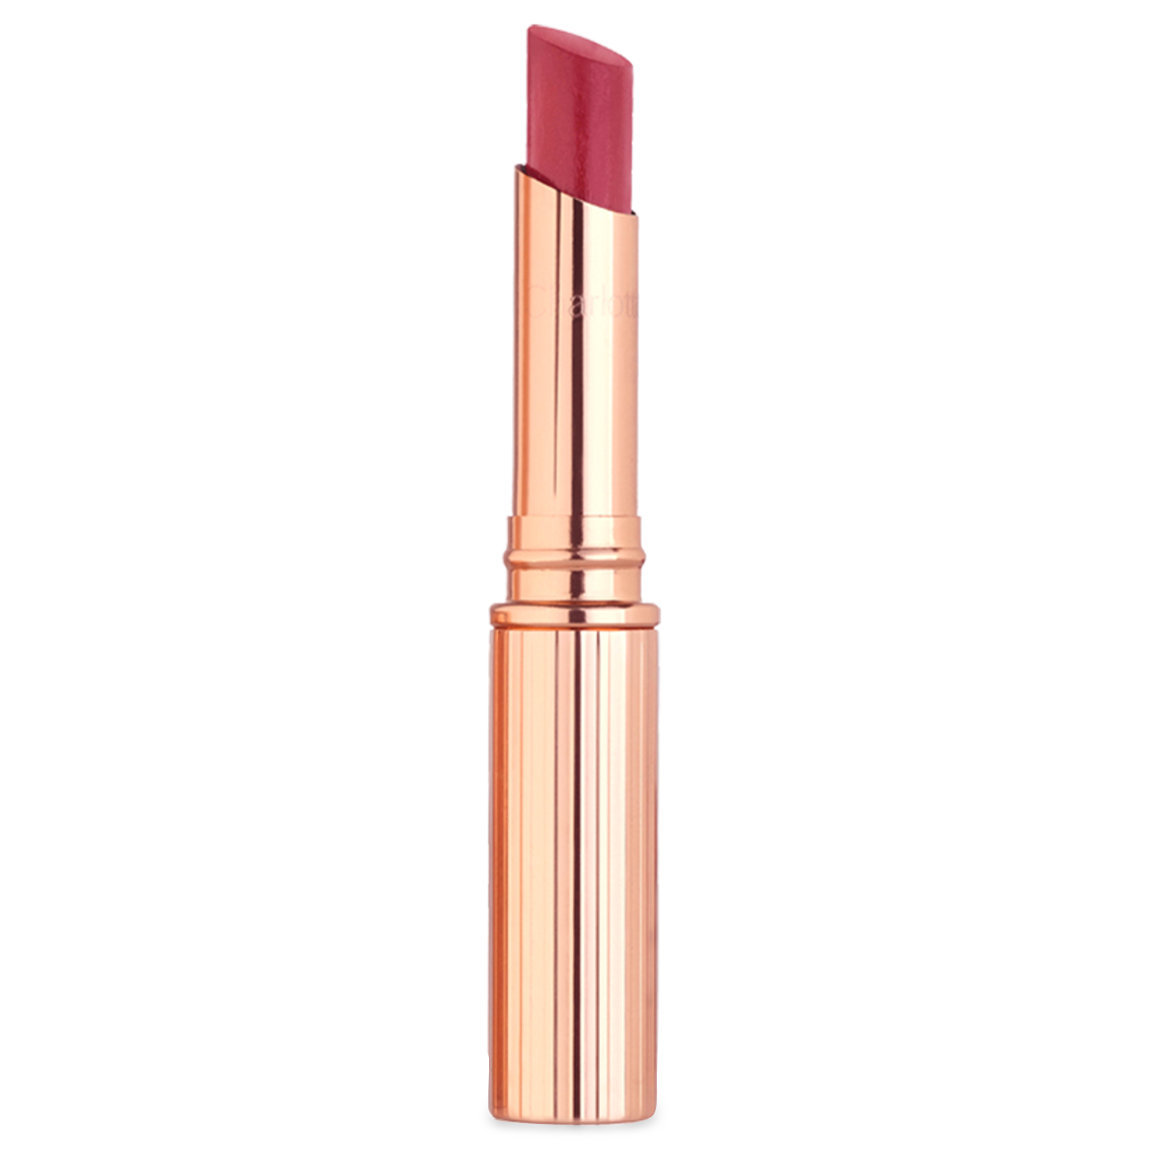 Charlotte Tilbury Superstar Lips Sexy Lips alternative view 1 - product swatch.